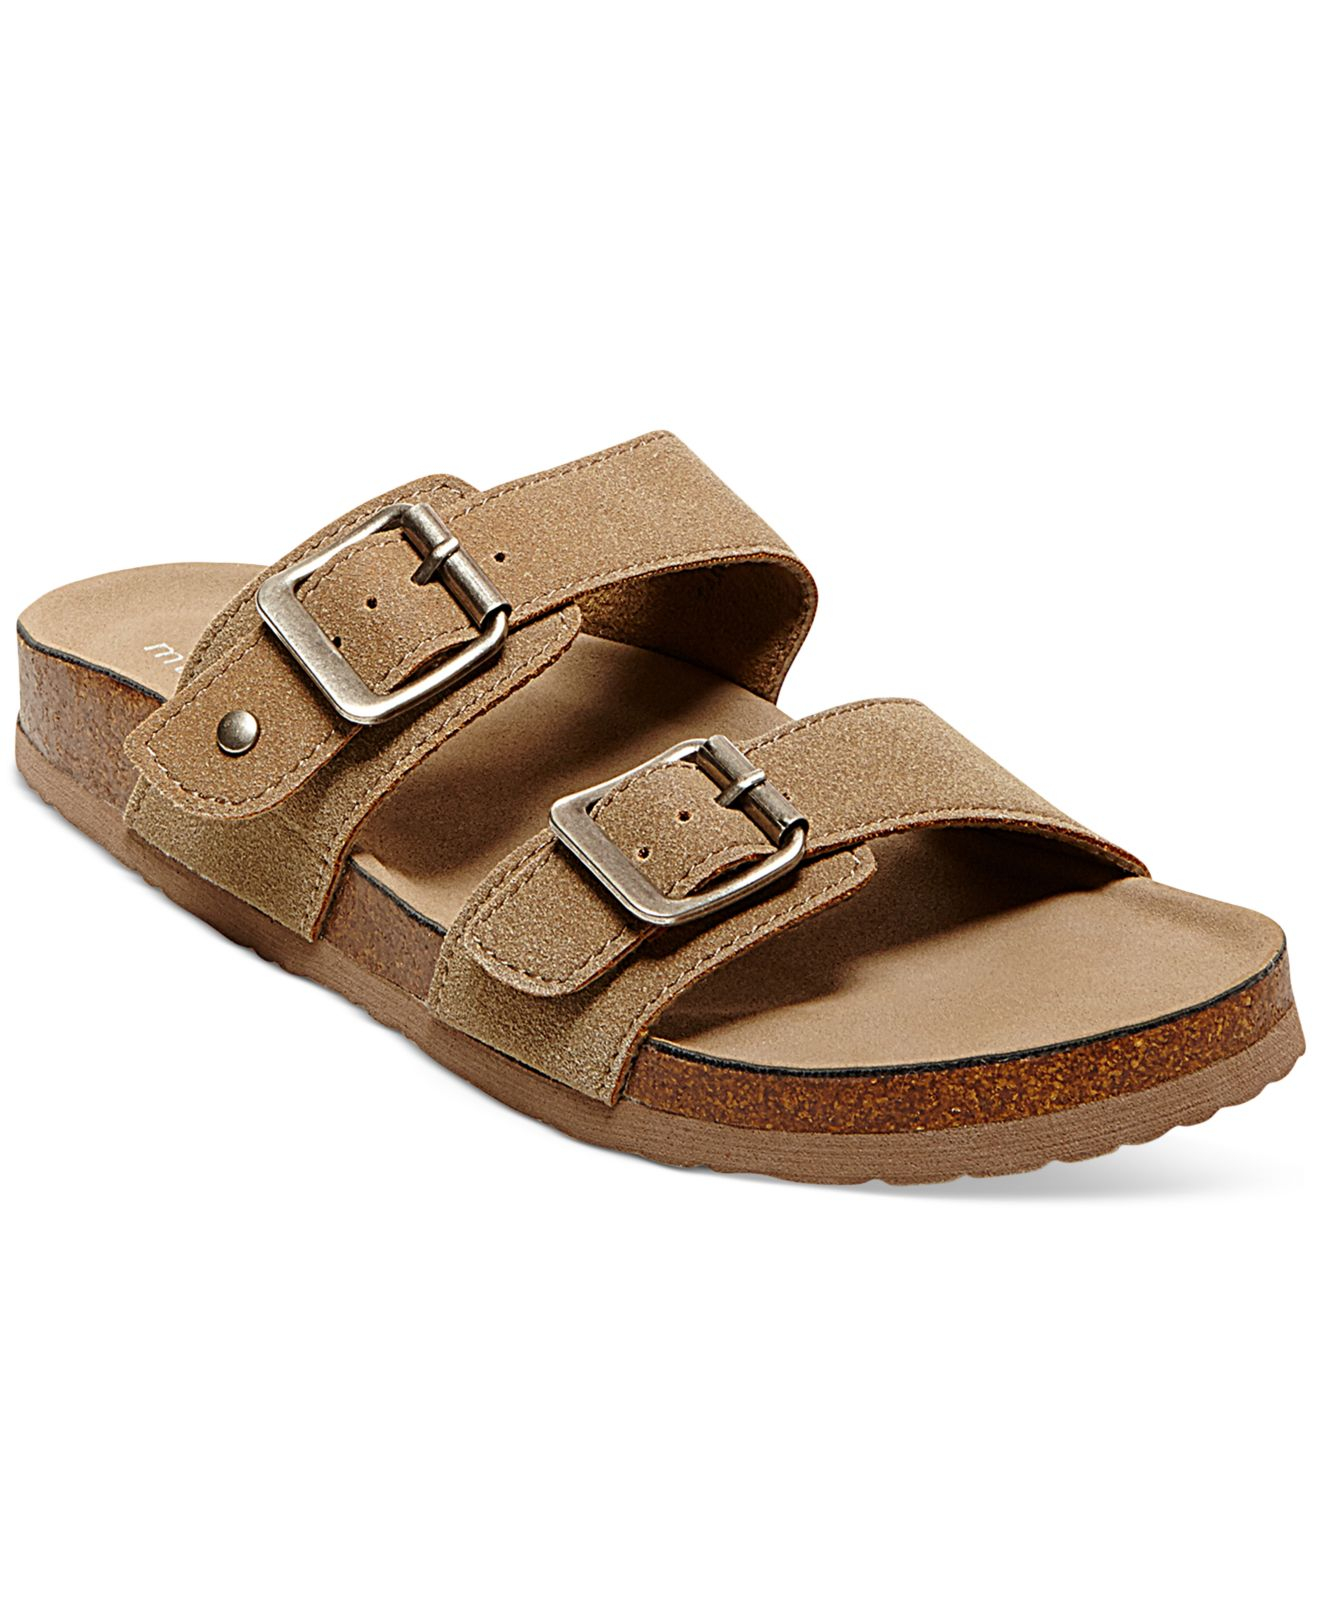 Madden girl Brando Footbed Sandals in Brown (Taupe Microsuede) | Lyst